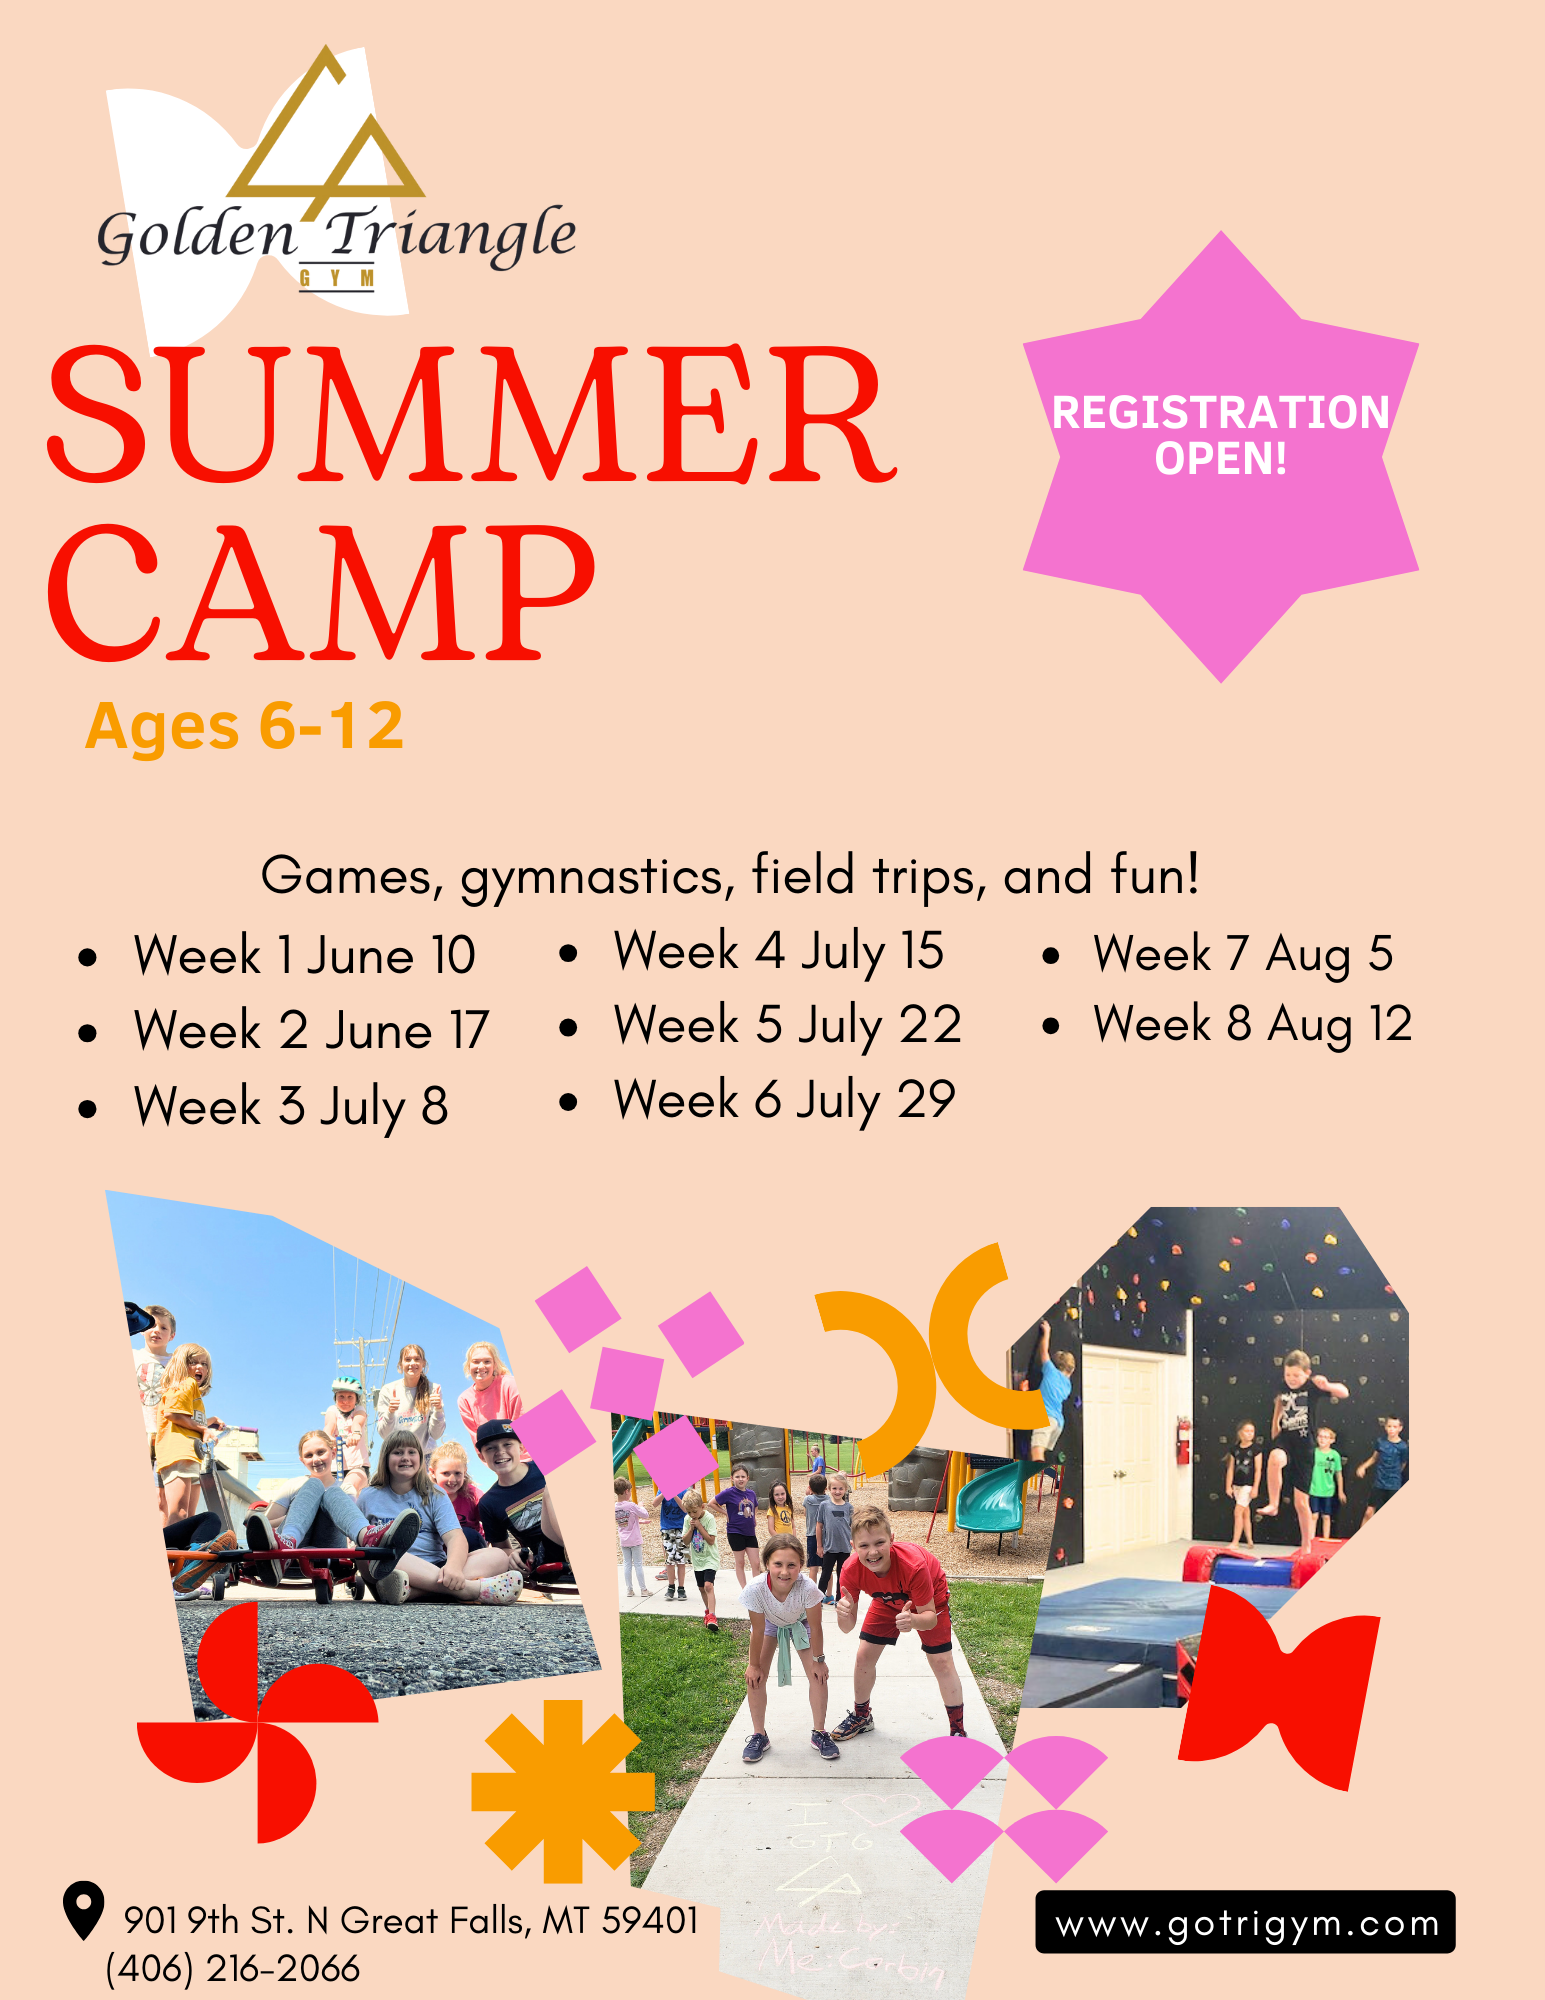 a poster for a summer camp for ages 6 to 12